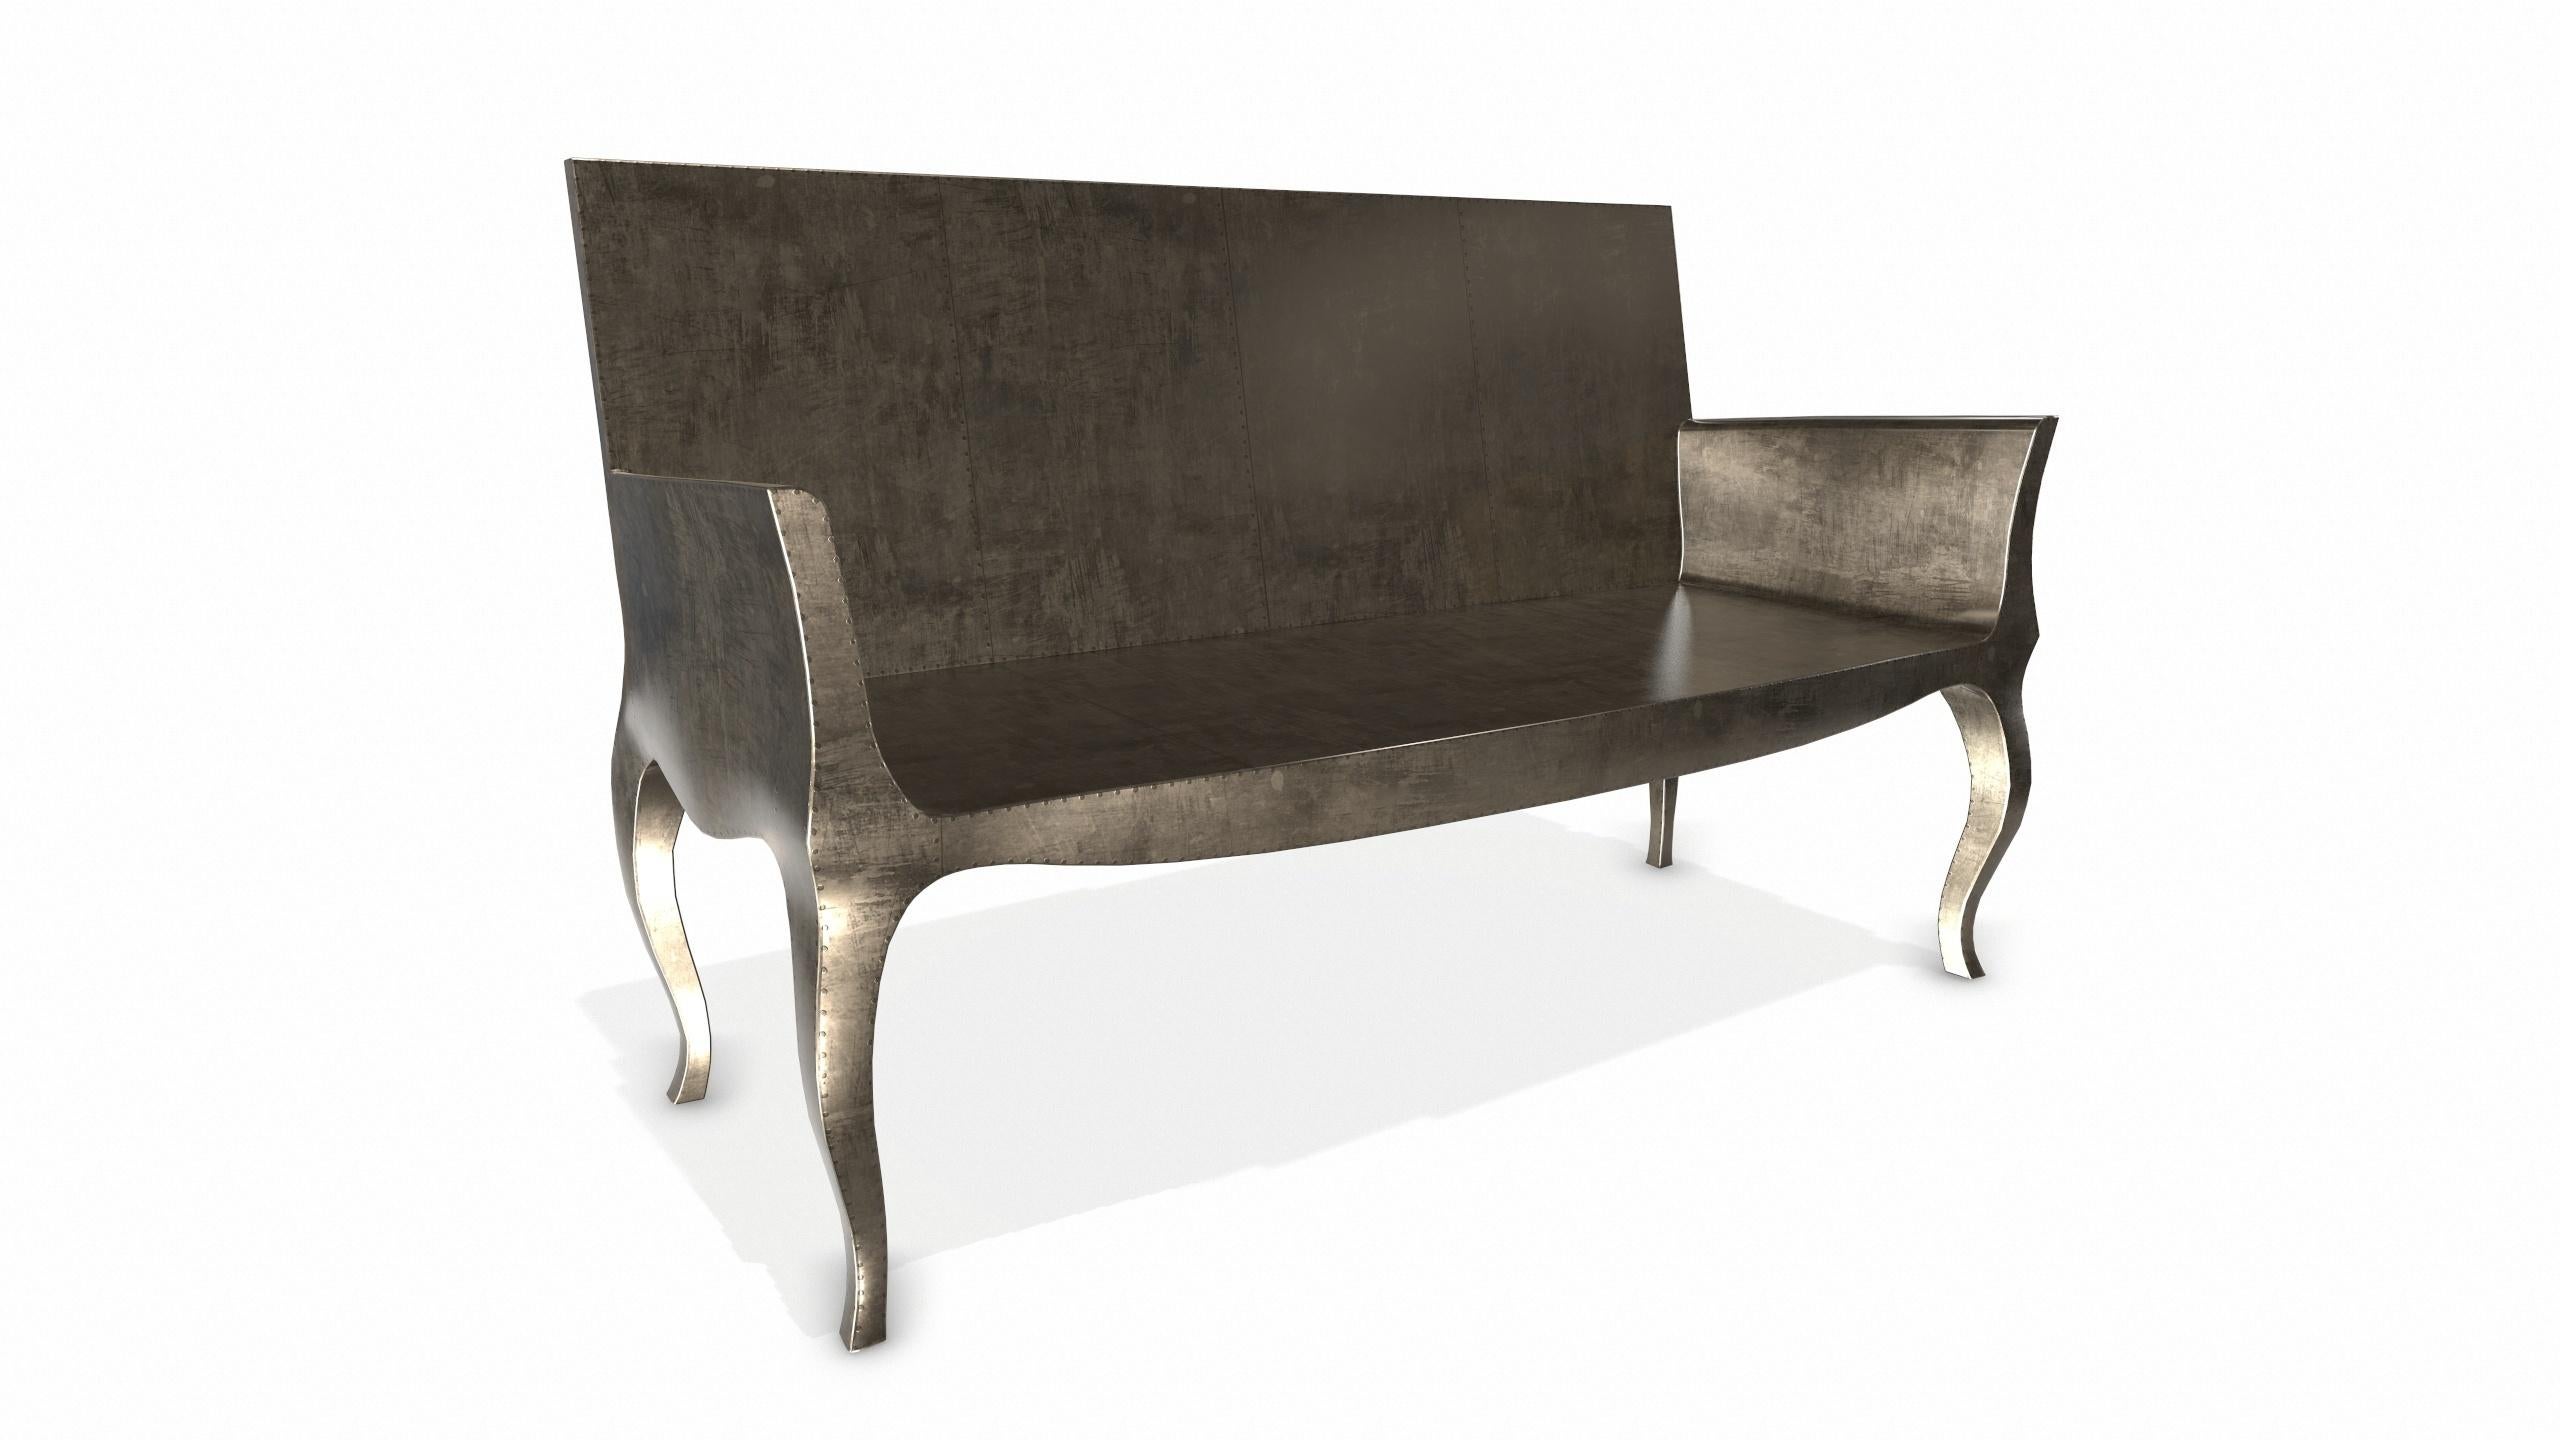 Contemporary Louise Settee Art Deco Lounge Chairs in Smooth Antique Bronze by Paul Mathieu For Sale